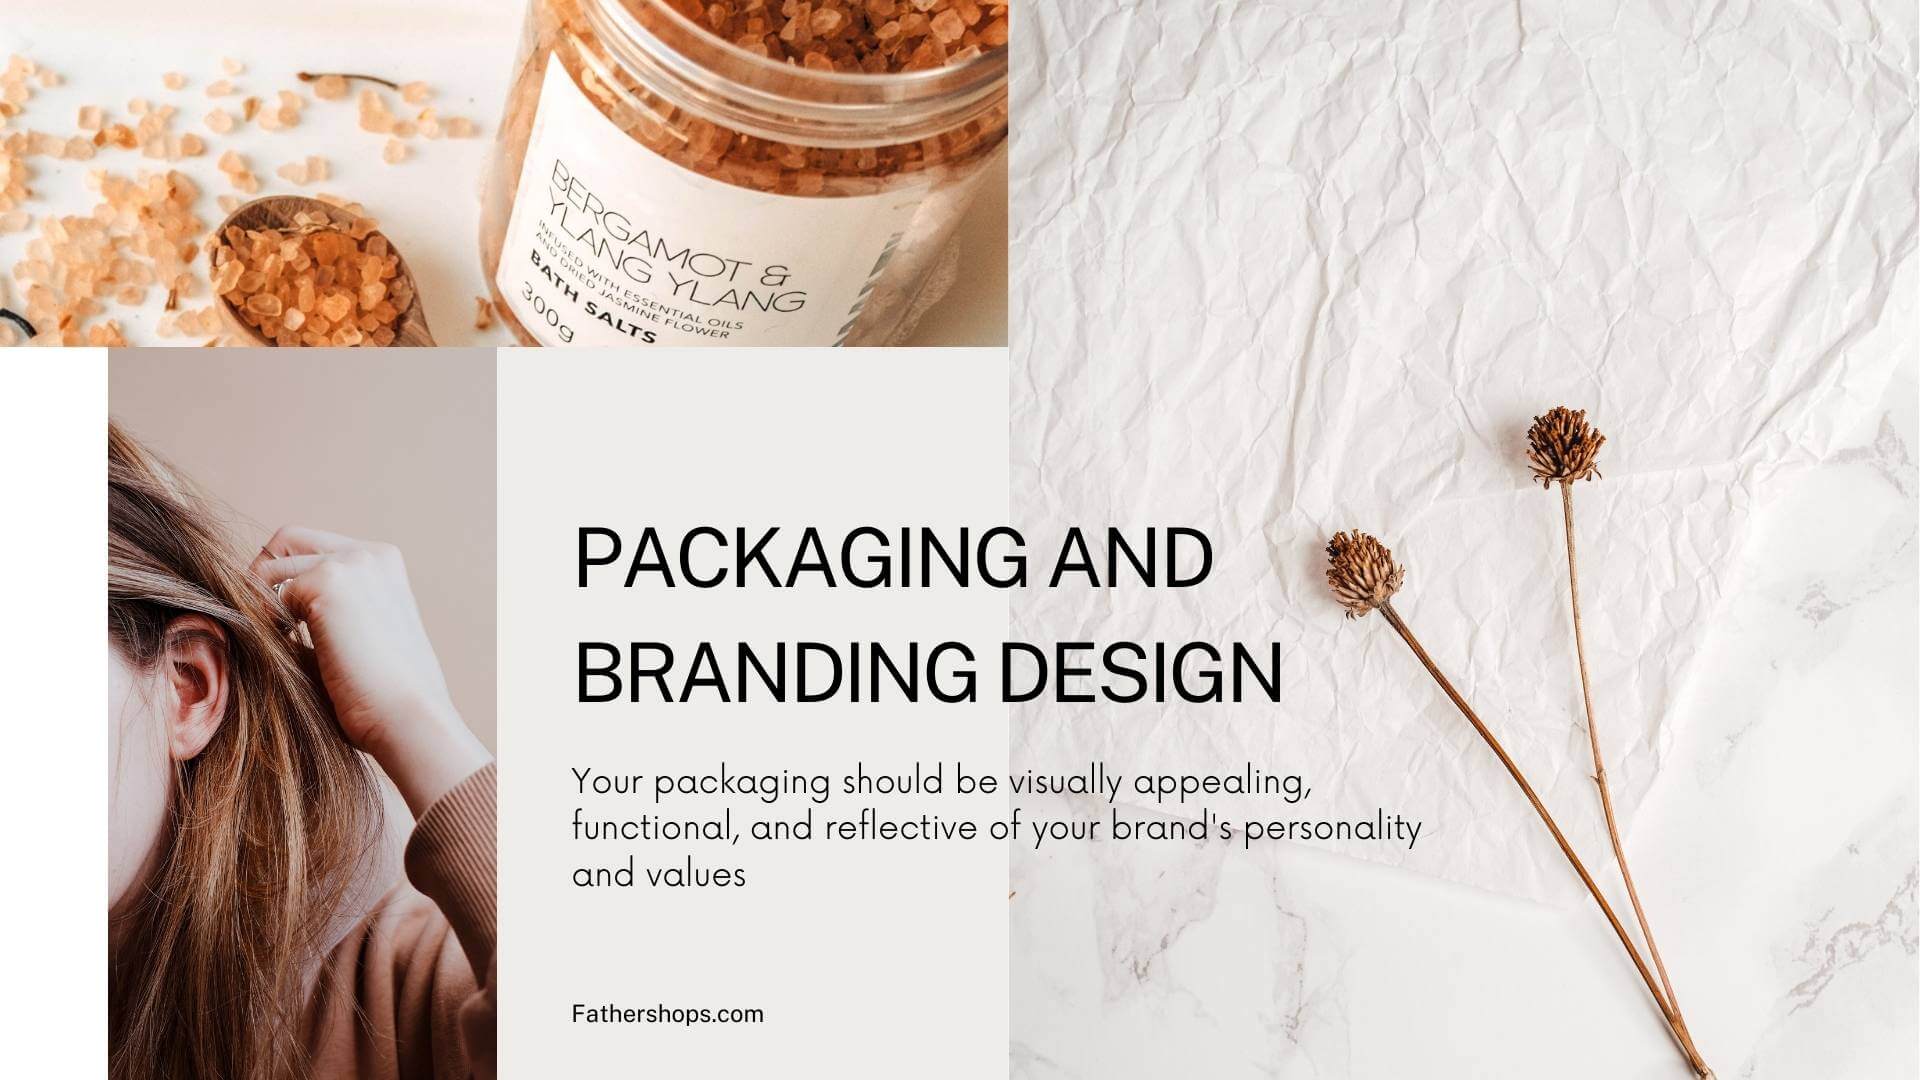 Packaging and branding design